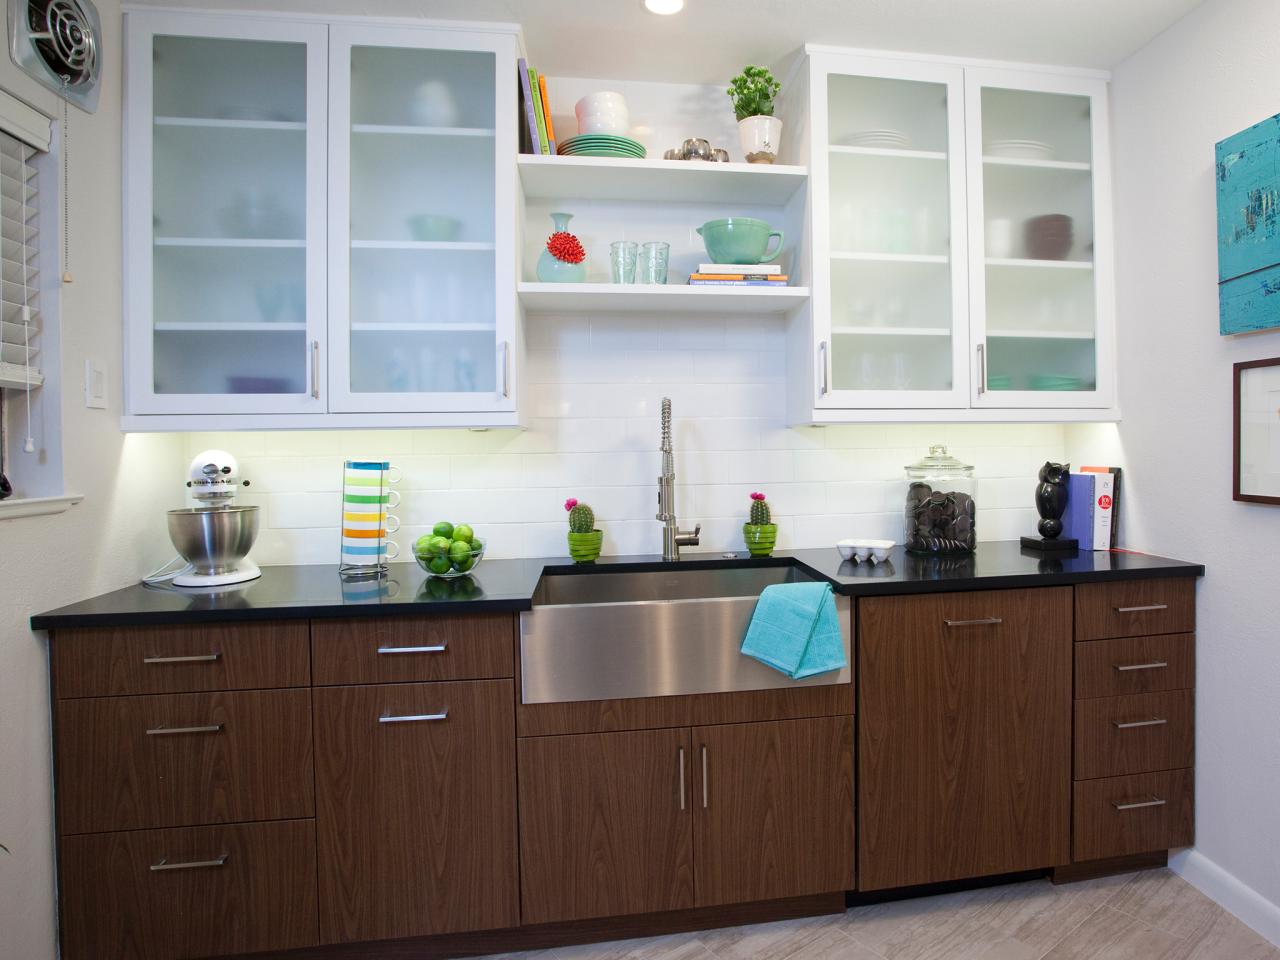 Refinishing Kitchen Cabinet Ideas: Pictures amp; Tips From 